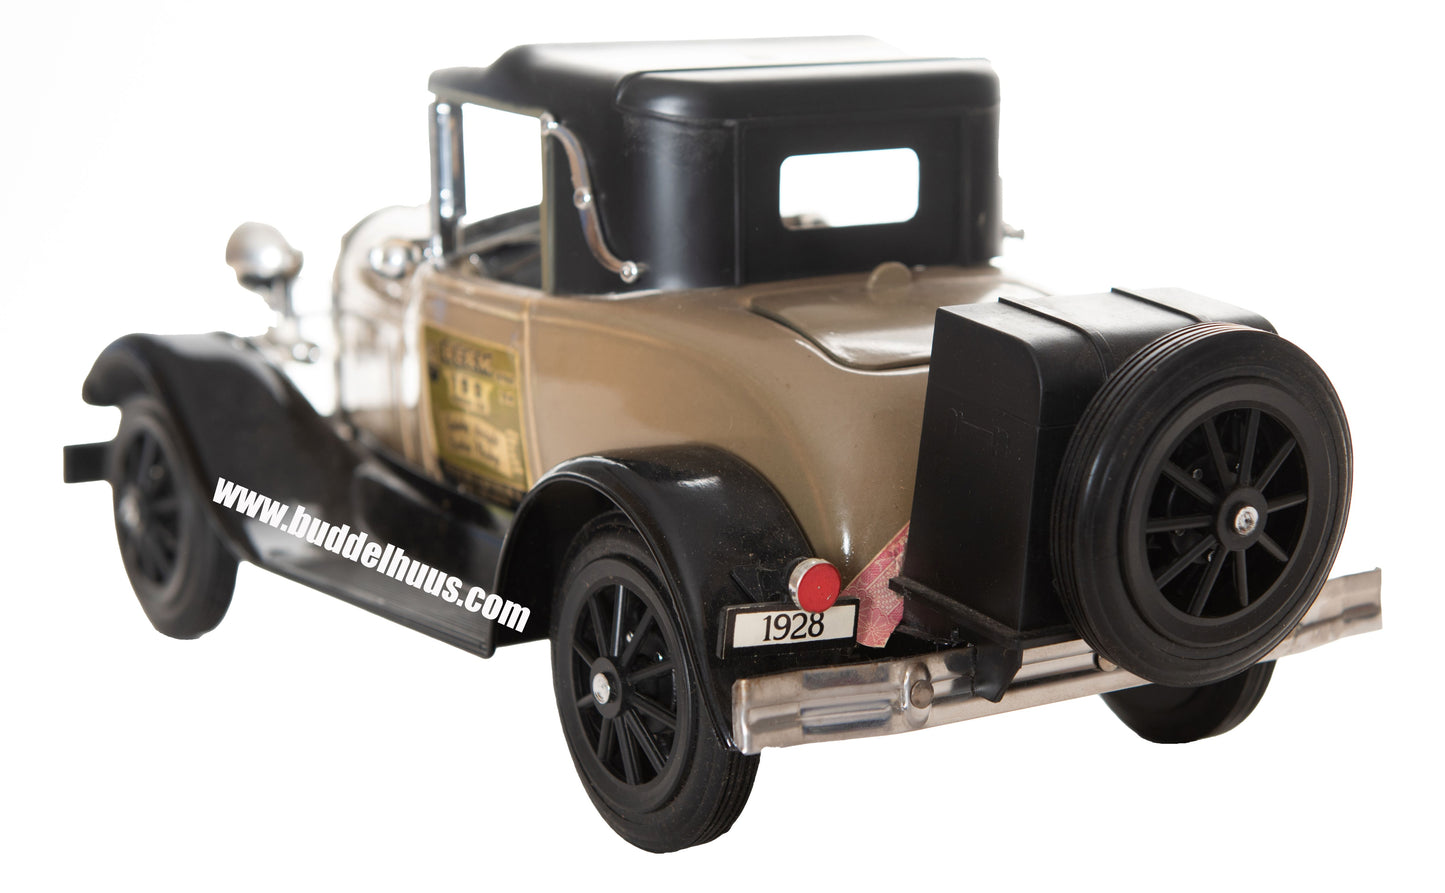 Jim Beam 100 Month Old 1928 Model A Ford Decanter (1980s)